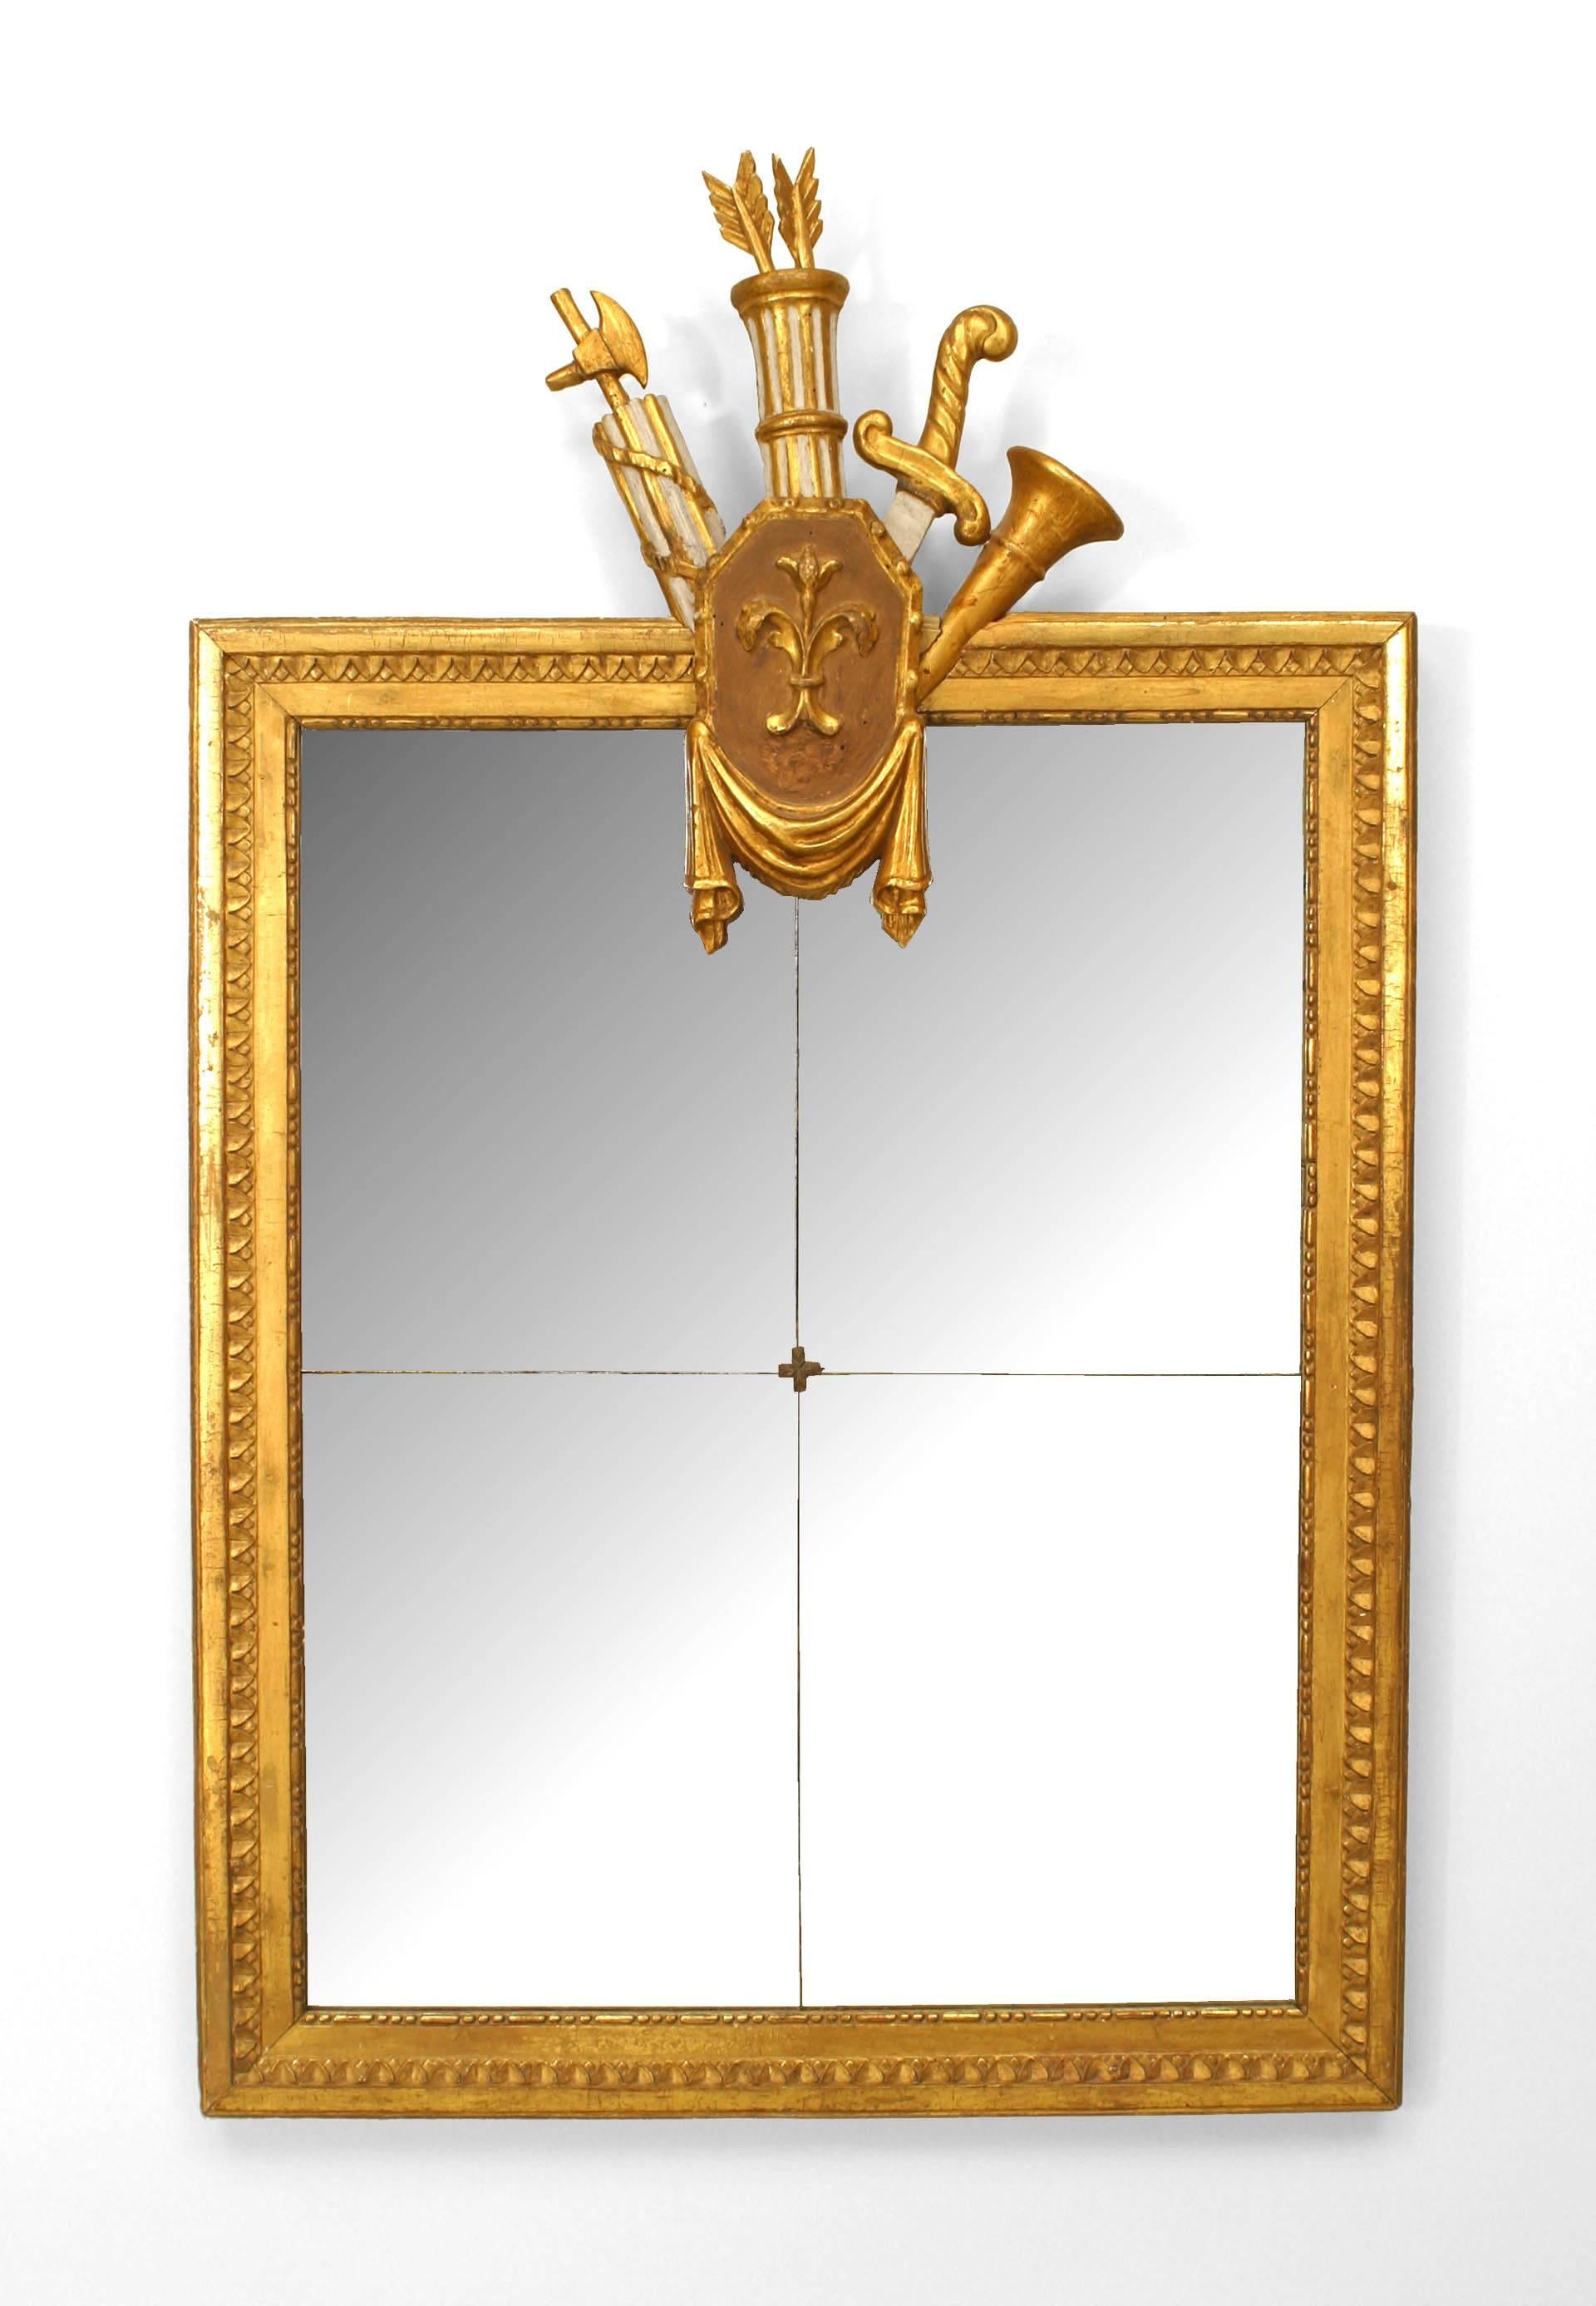 Pair of Italian Neoclassic (18/19th Century) gilt framed wall mirrors with four glass panels and a white painted and gilt trophy carved pediment with a fleur-de-lis design. (PRICED AS Pair)
